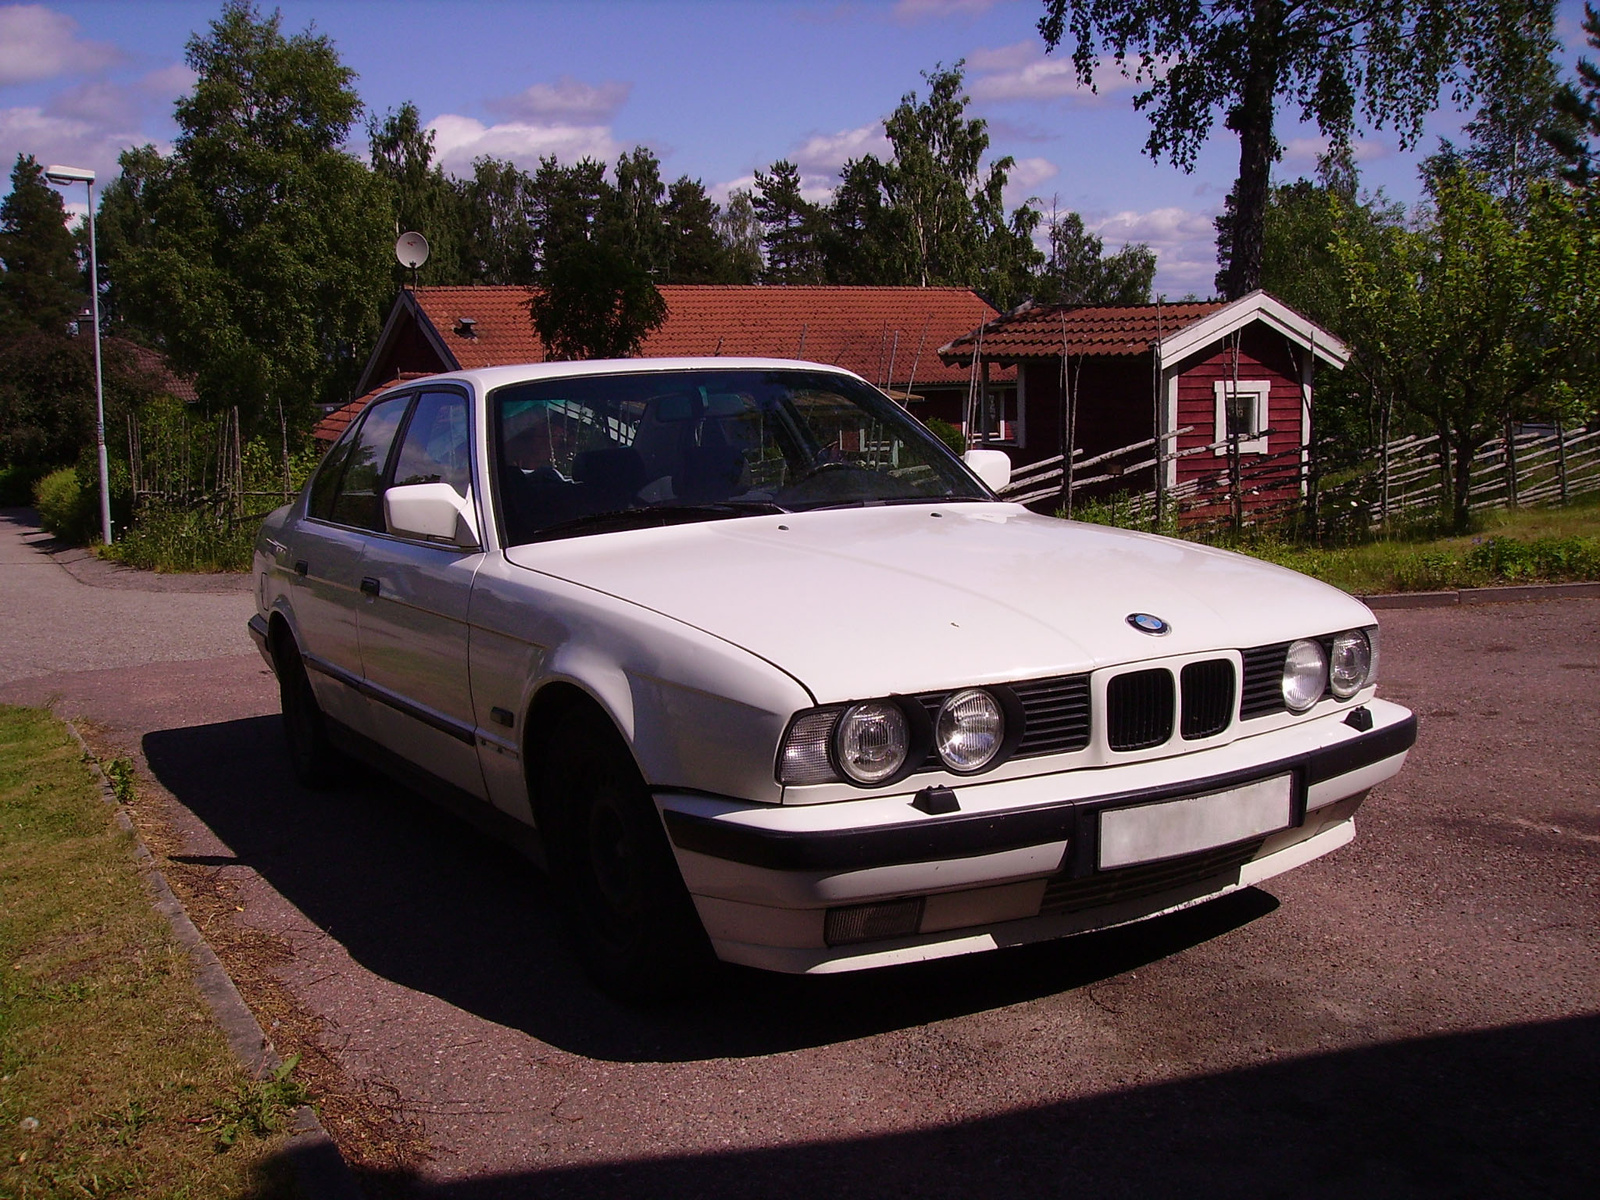 BMW 525i 1990: Review, Amazing Pictures and Images – Look at the car